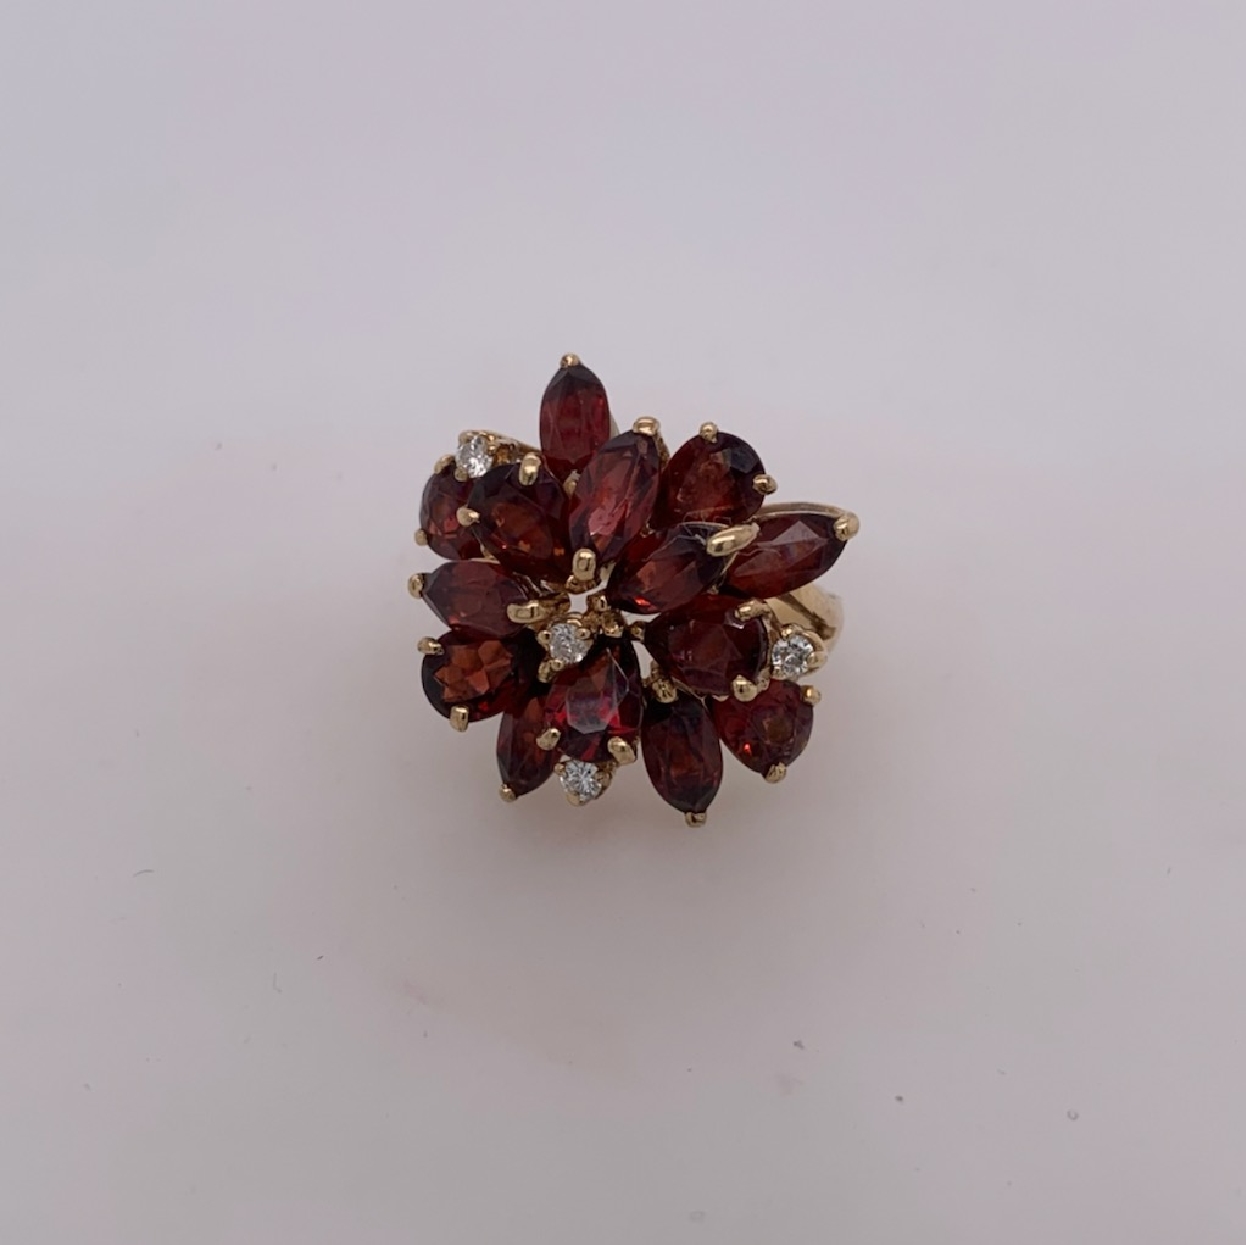 14K Yellow Gold Pear and Marquis Shaped Garnets in Floral Cluster with Small Diamond Accents

Size 6